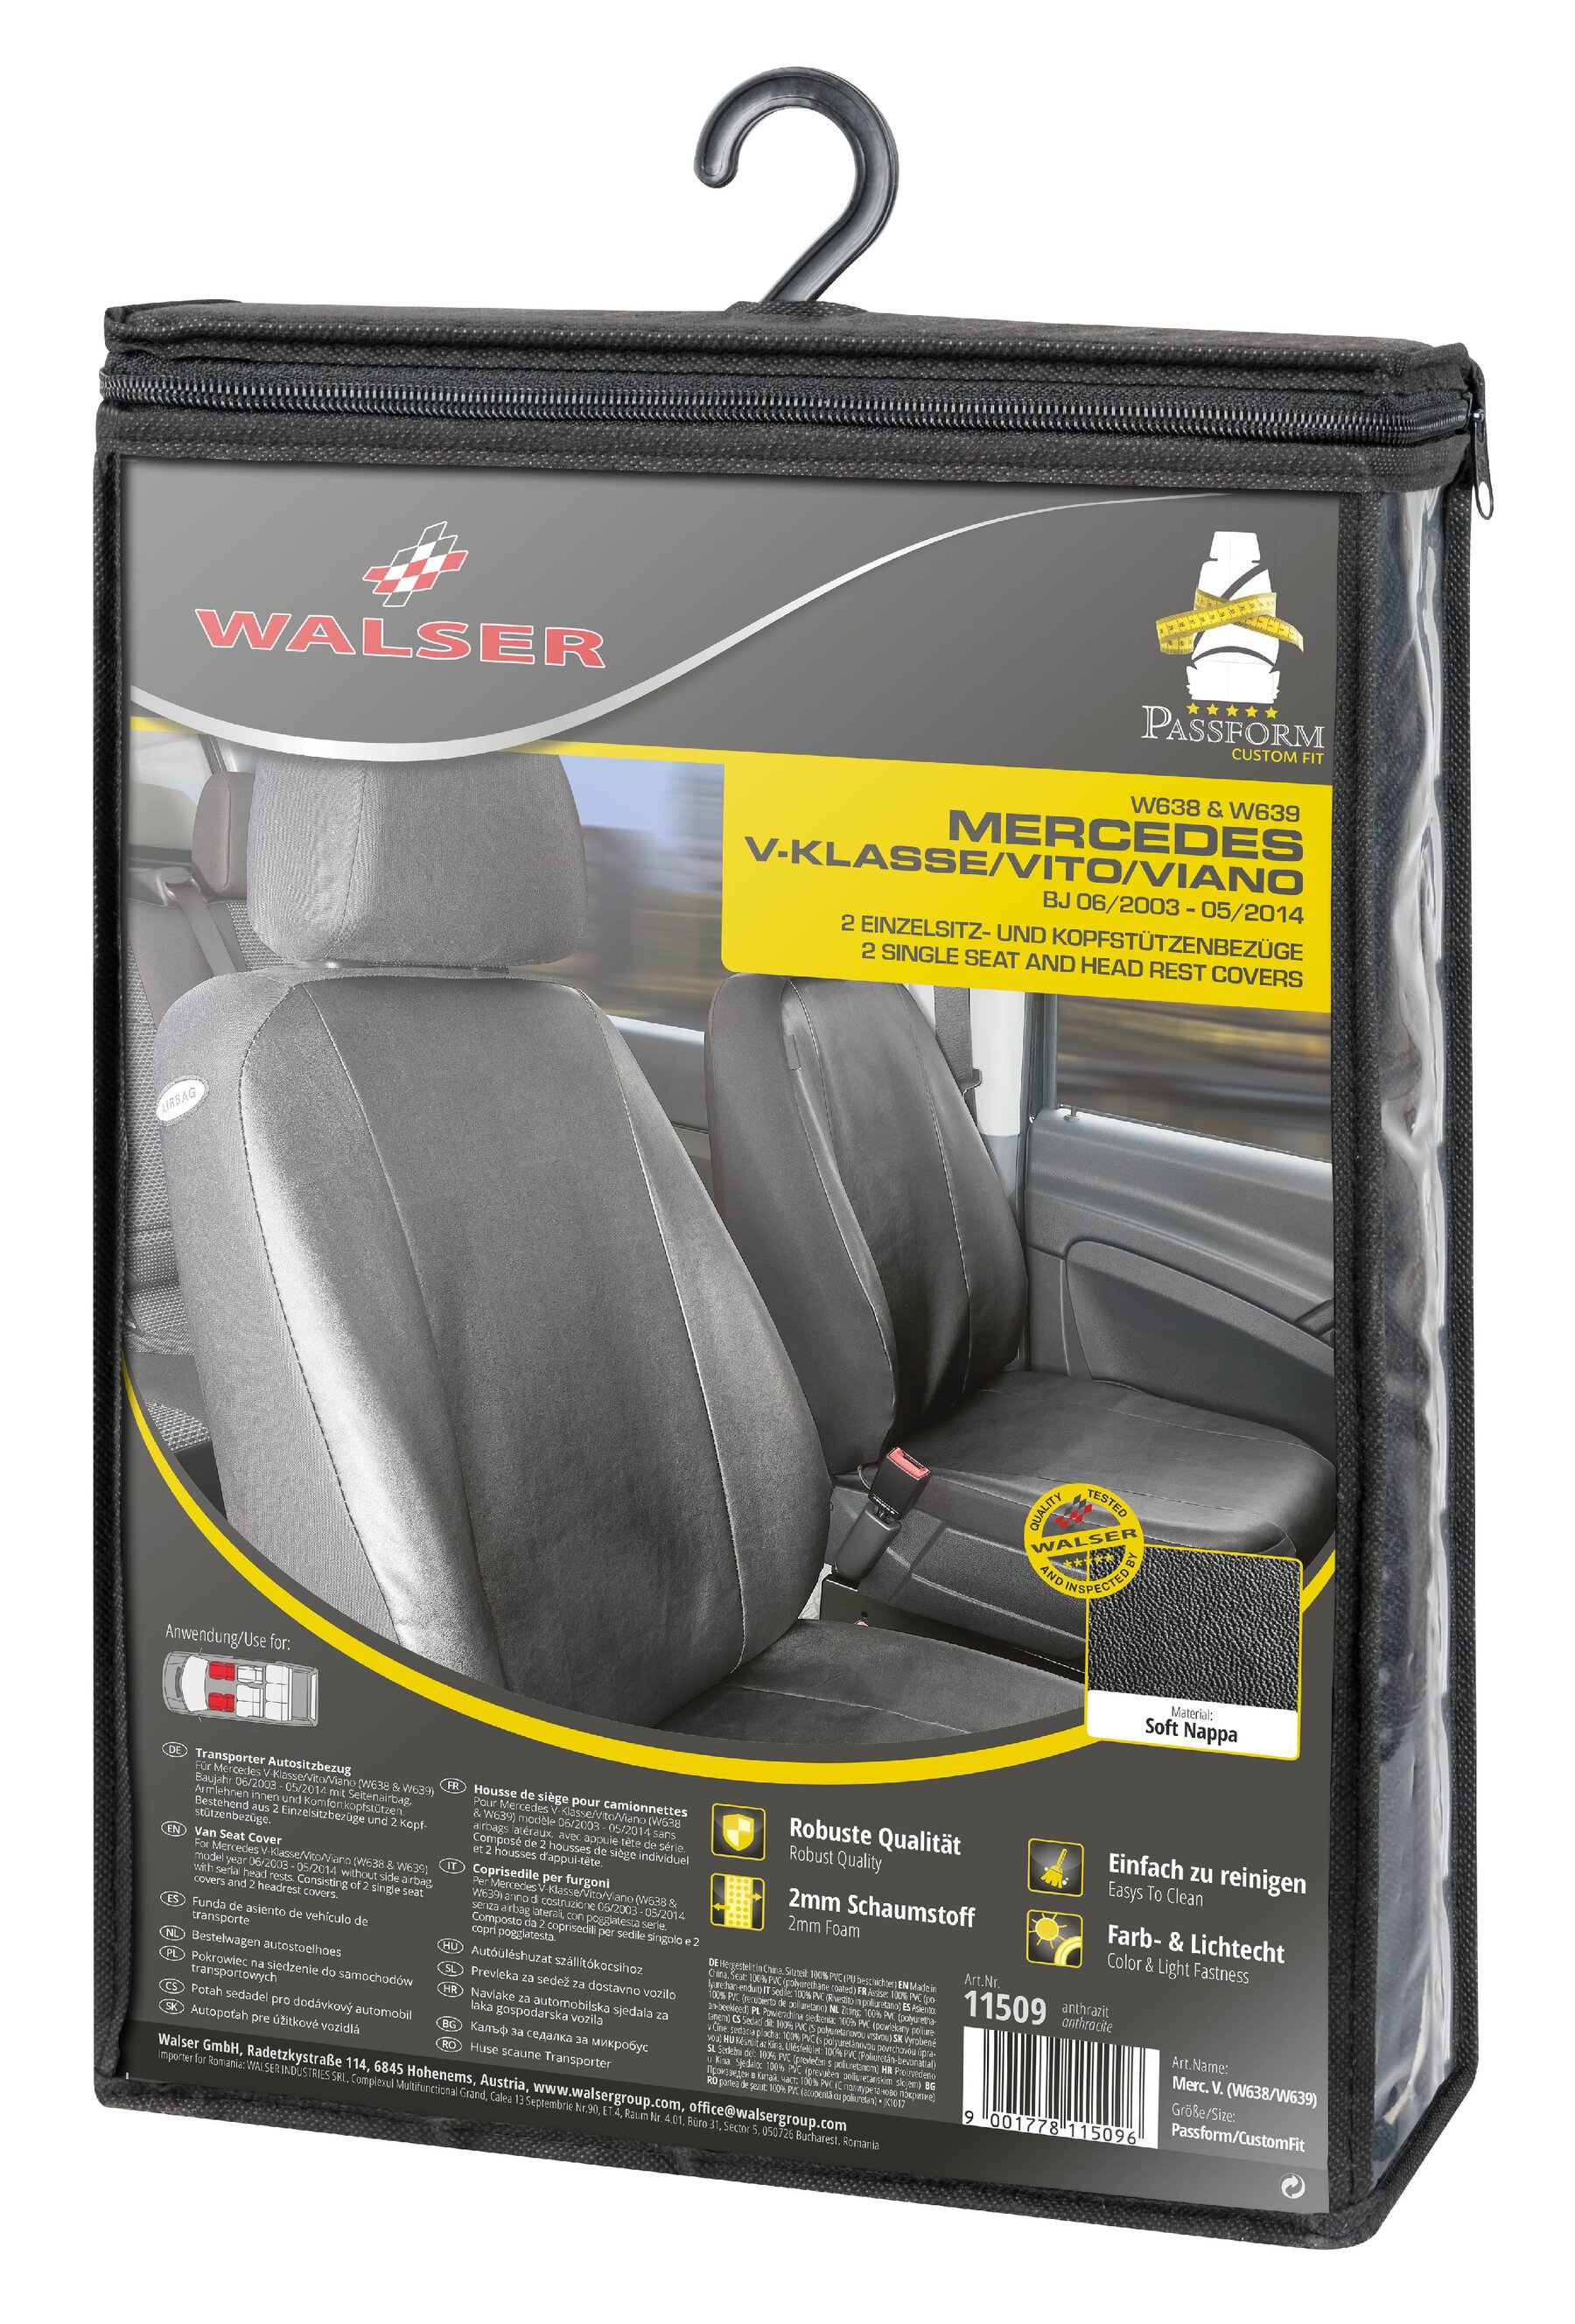 Car Seat cover Transporter made of imitation leather for Mercedes-Benz Viano/Vito, 2 single seats without armrest